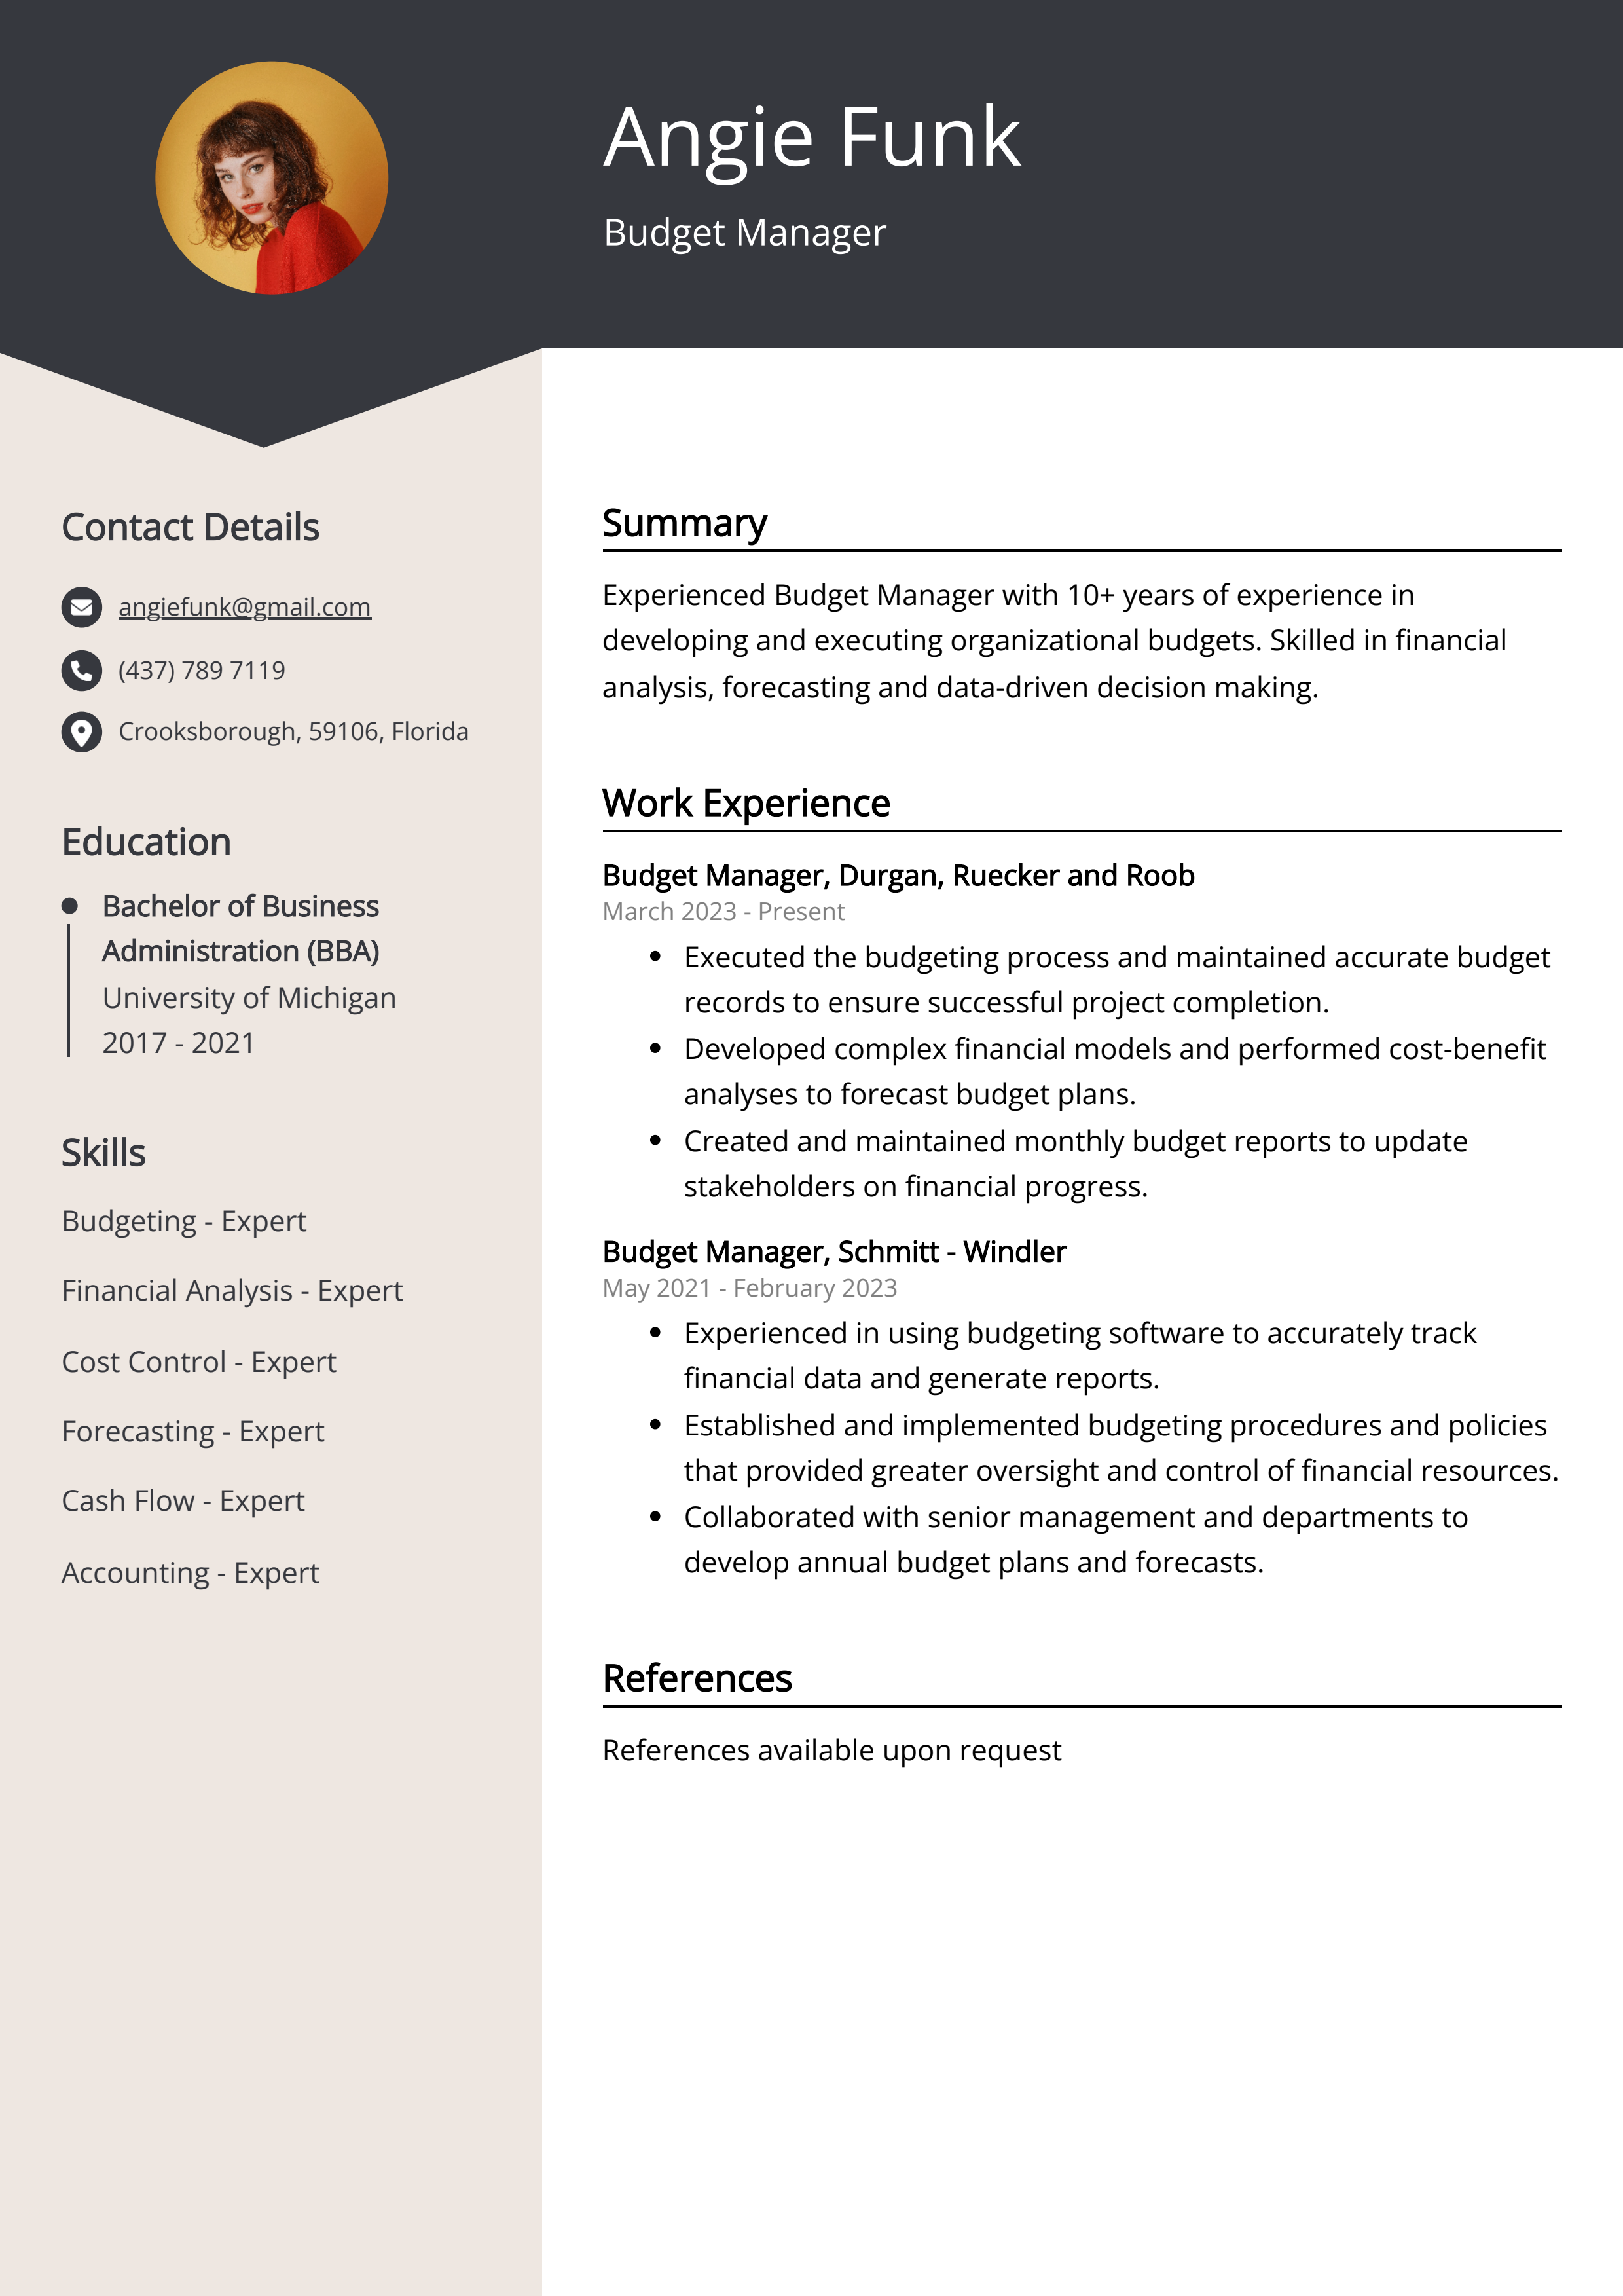 Budget Manager CV Example